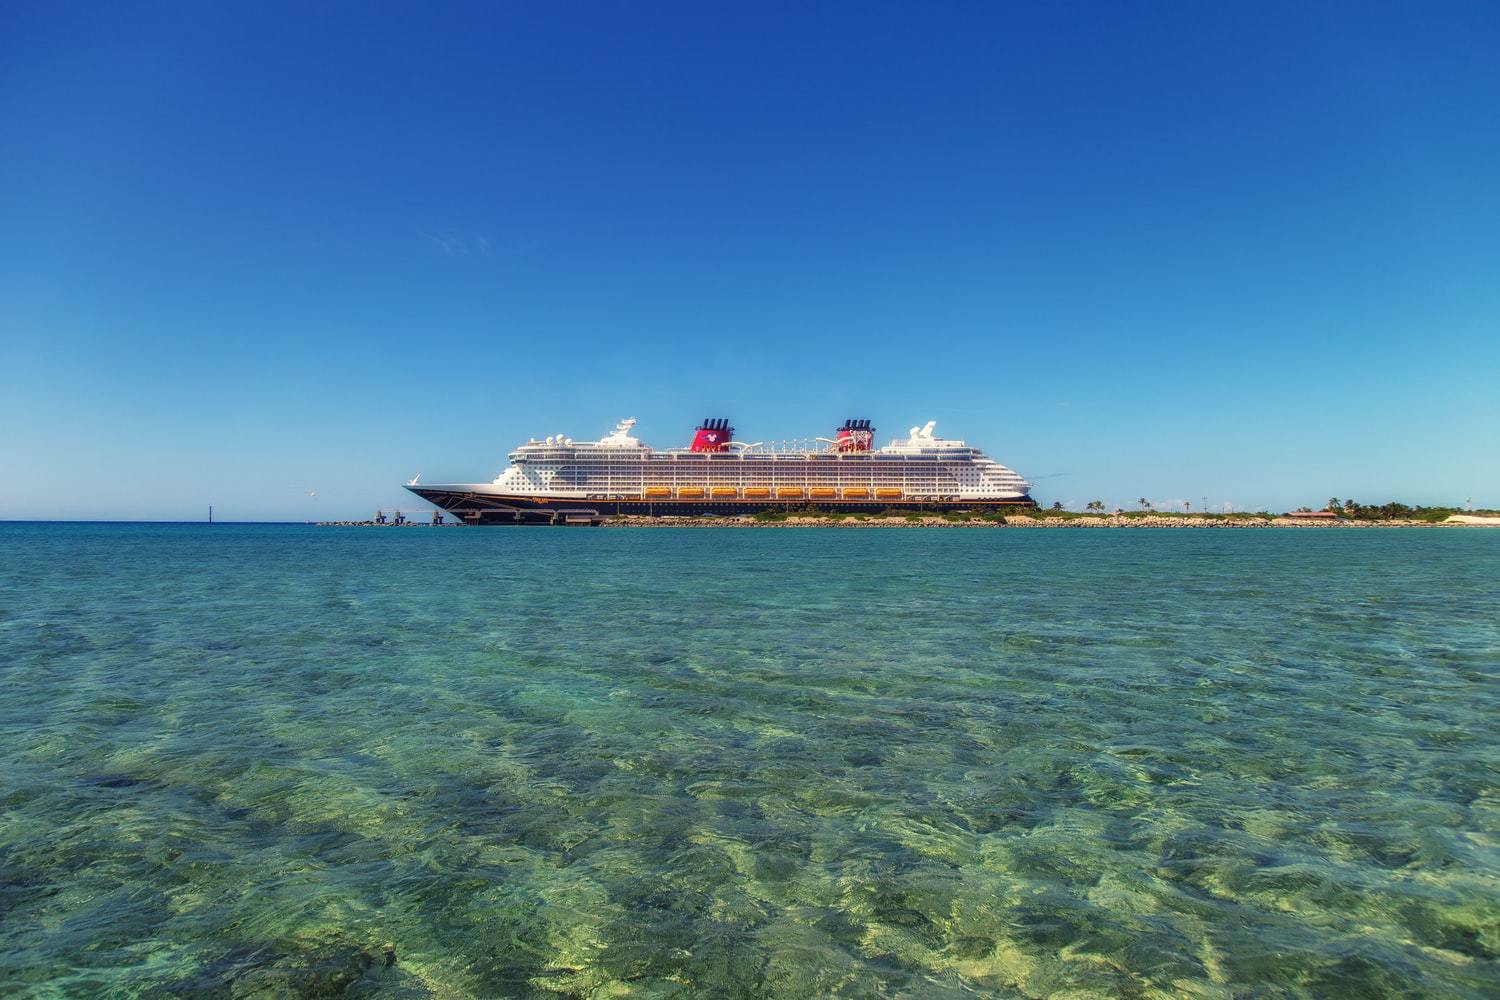 Disney Cruise packing list  A little fun, a little love, and a whole lot  of